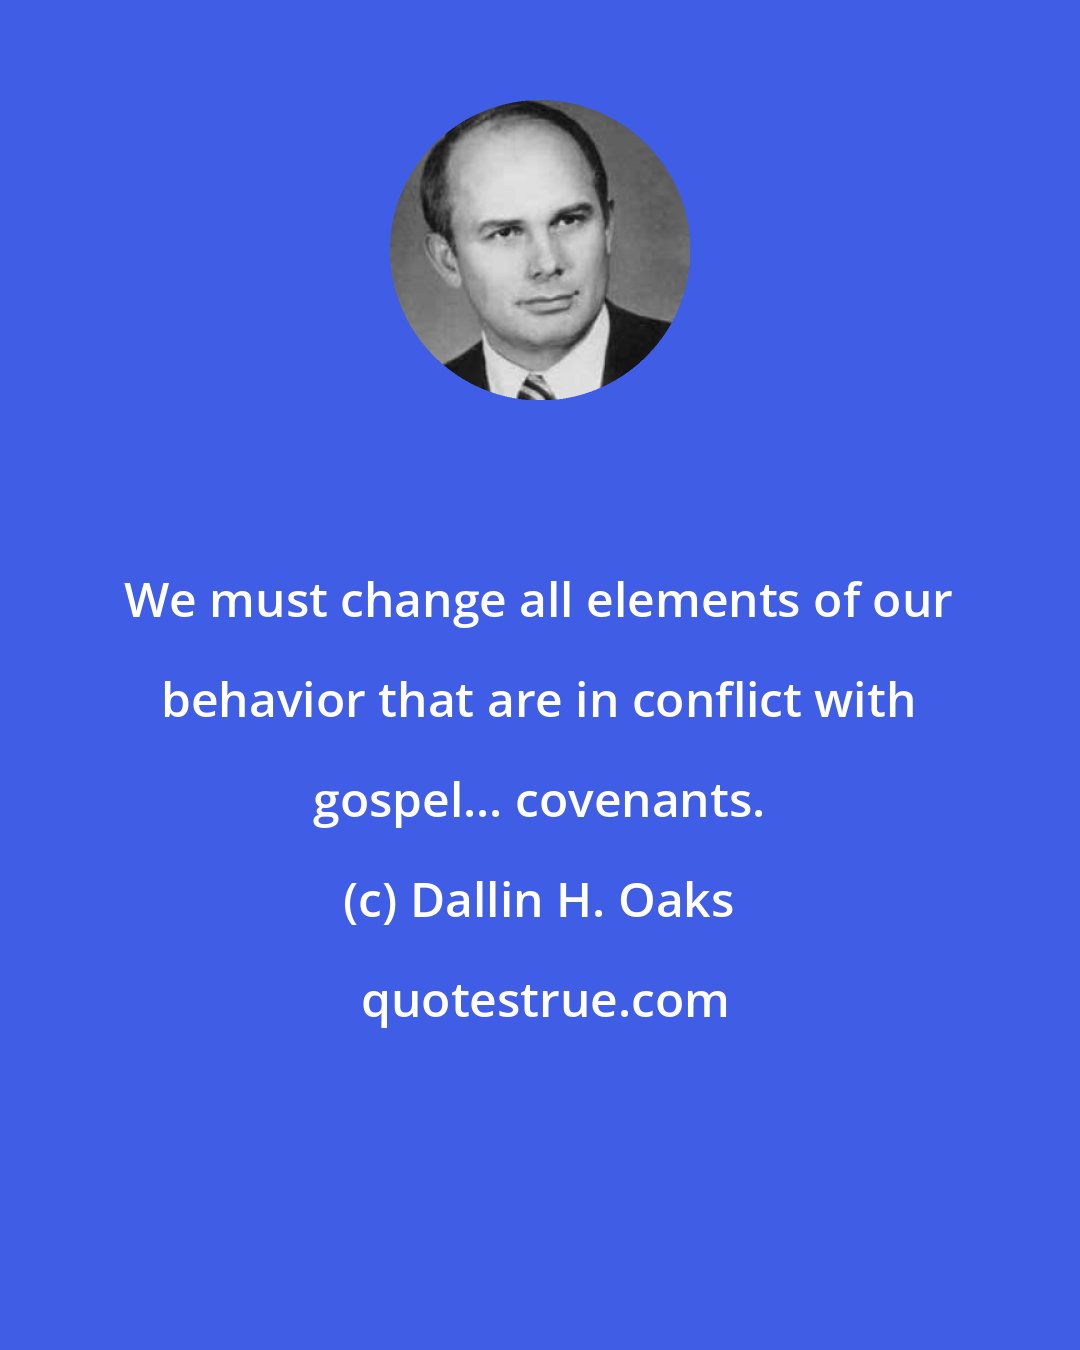 Dallin H. Oaks: We must change all elements of our behavior that are in conflict with gospel... covenants.